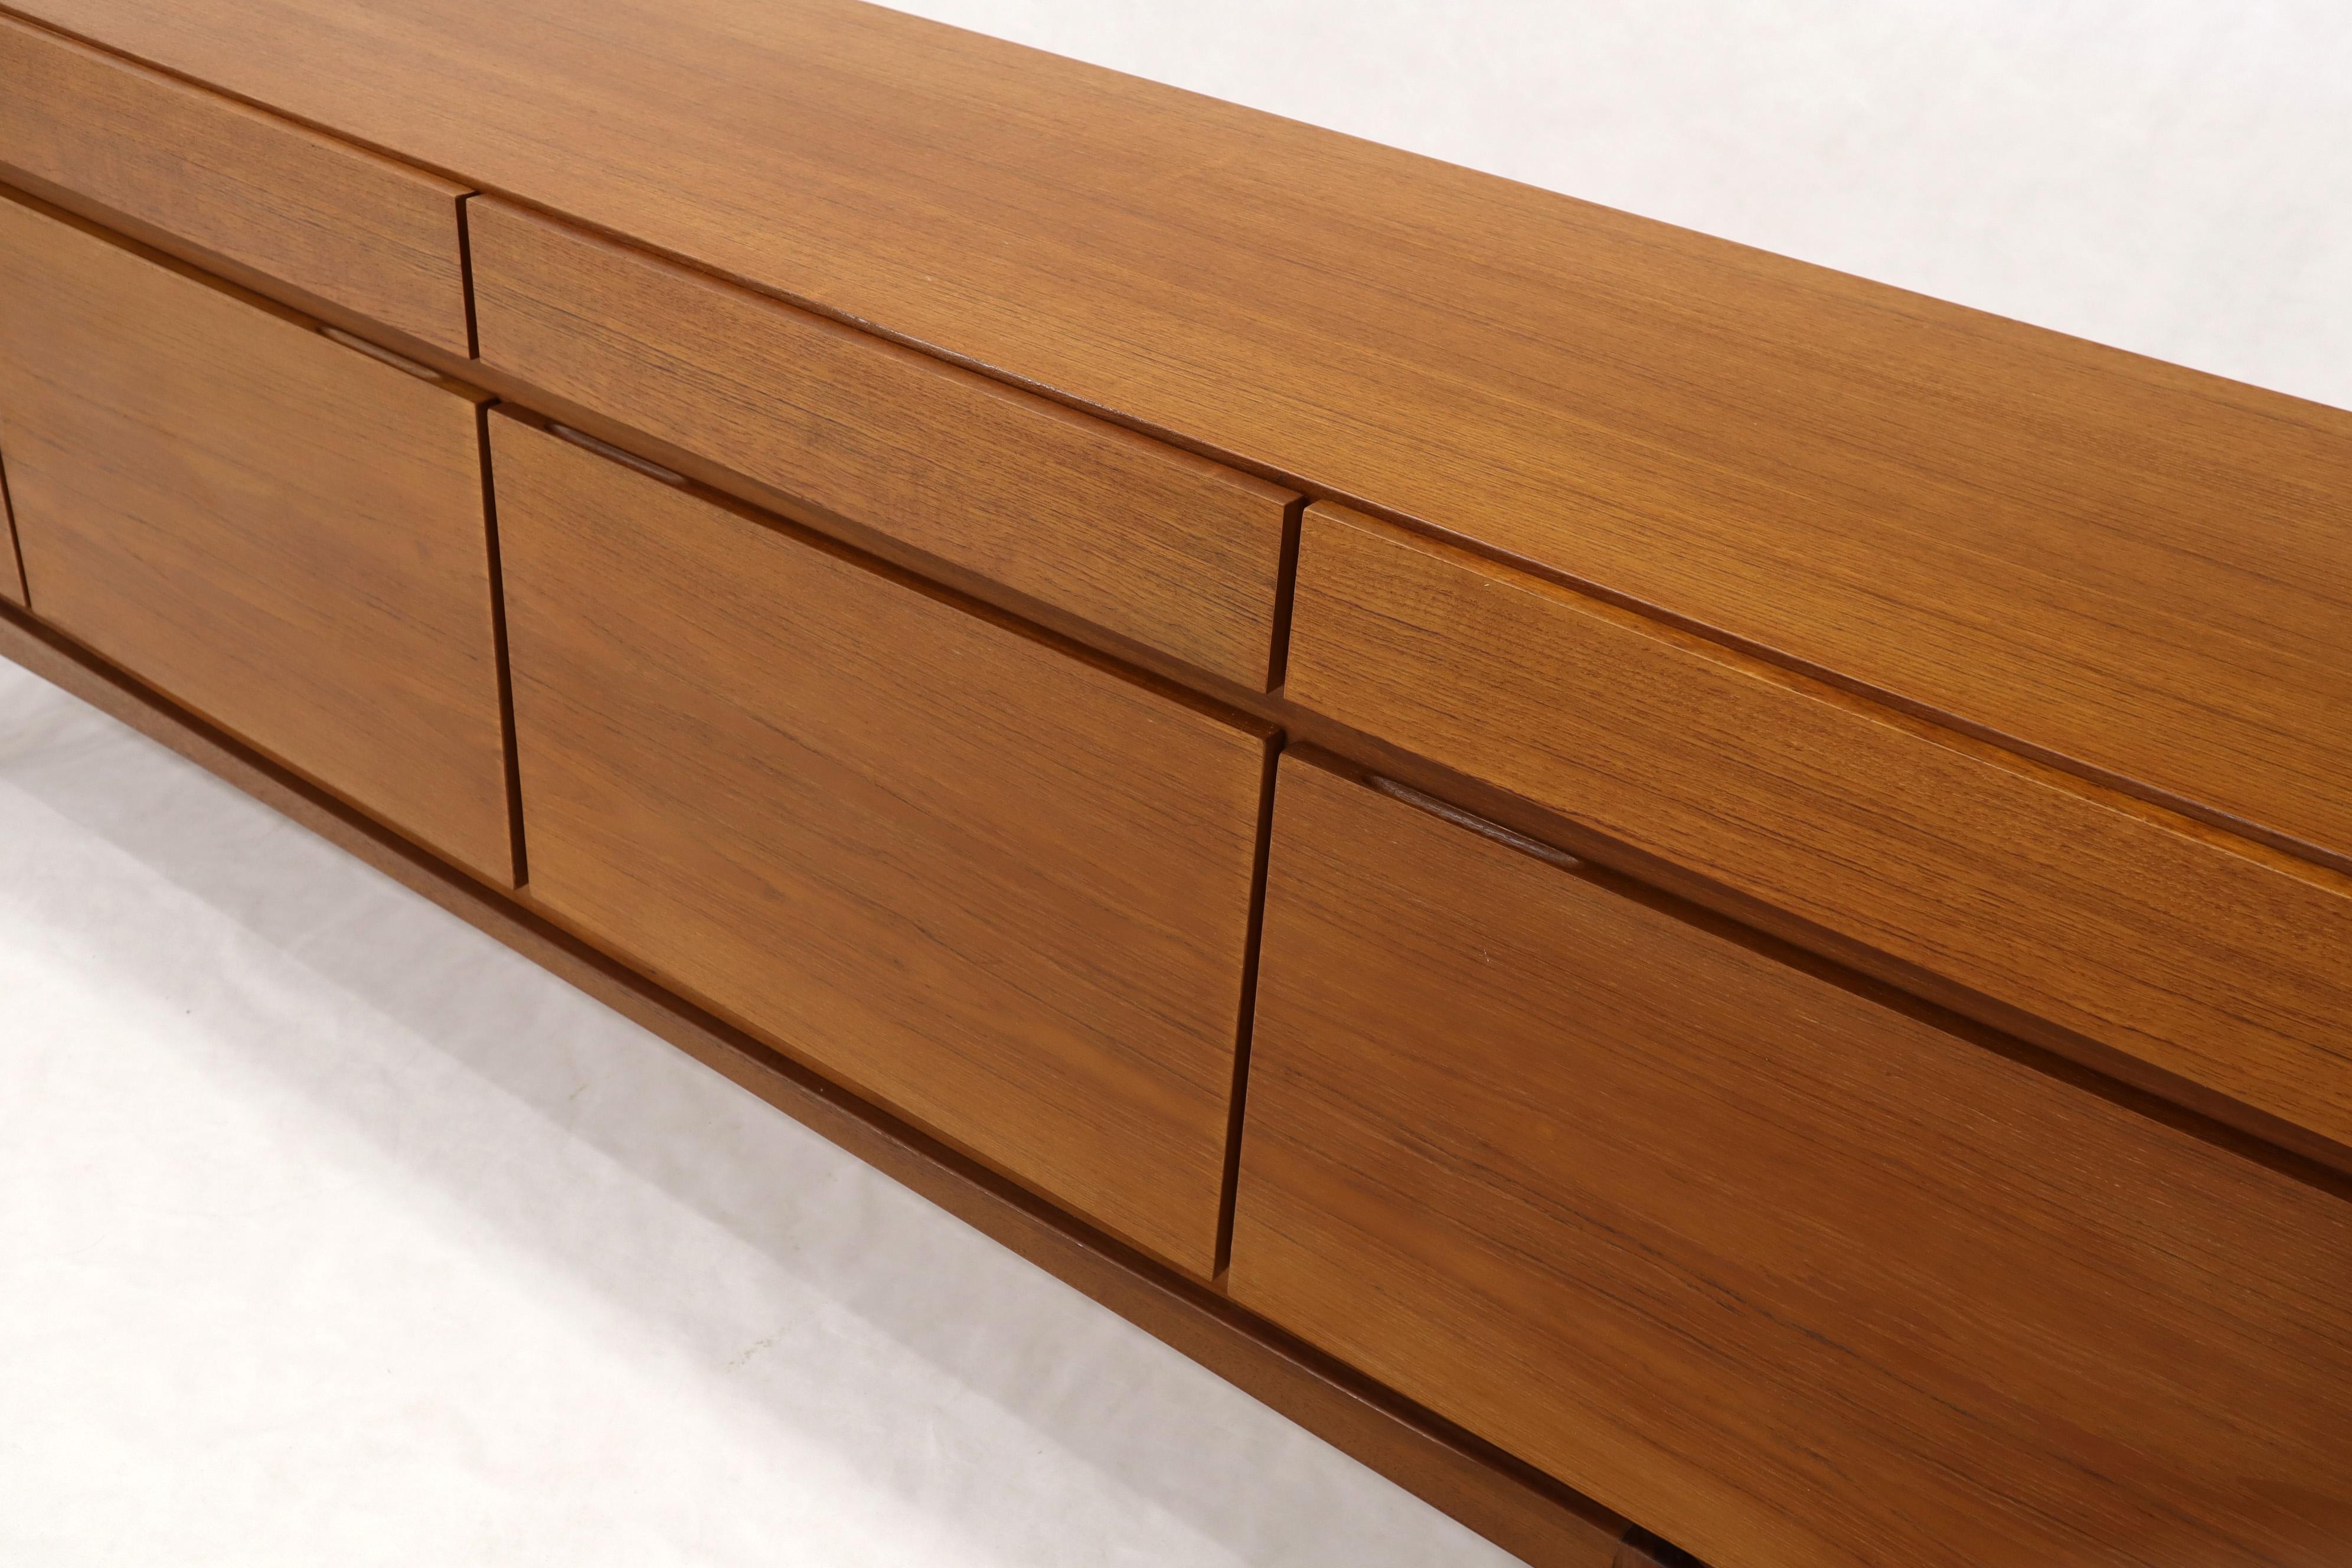 20th Century Long Low Danish Mid-Century Modern Credenza Four Doors and Drawers Compartments 